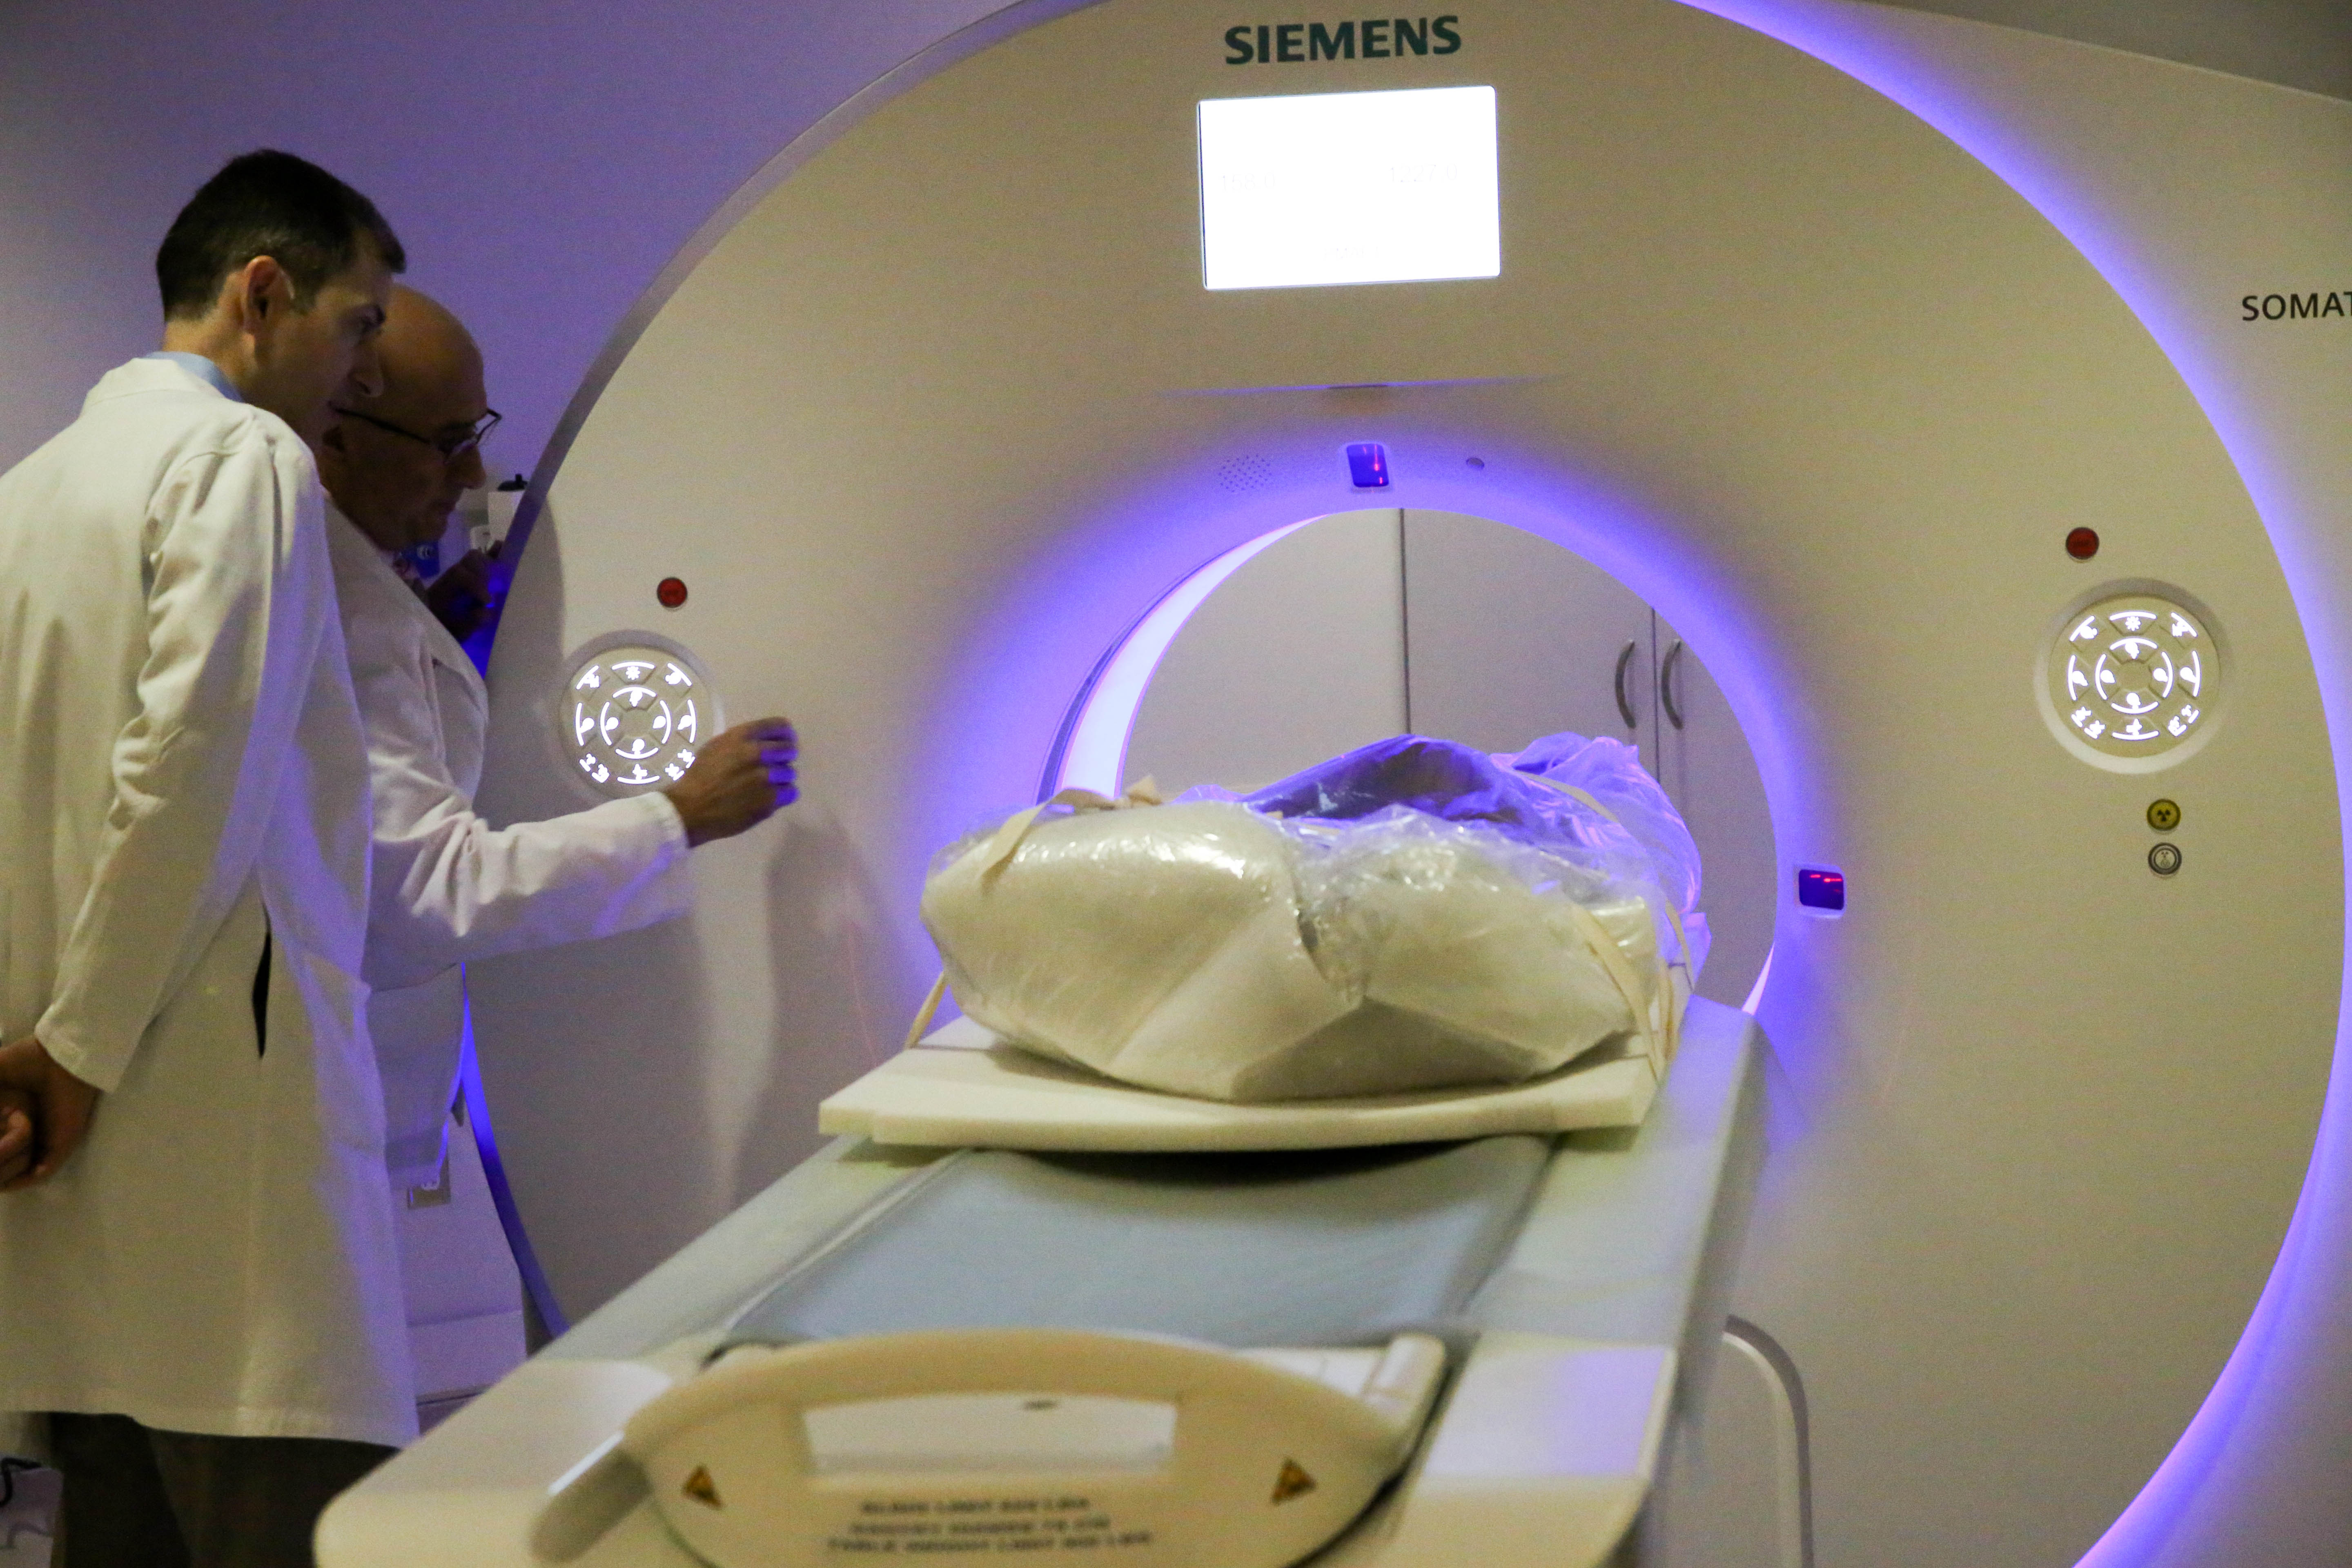 Researchers watch as the mummy travels into the CT machine.